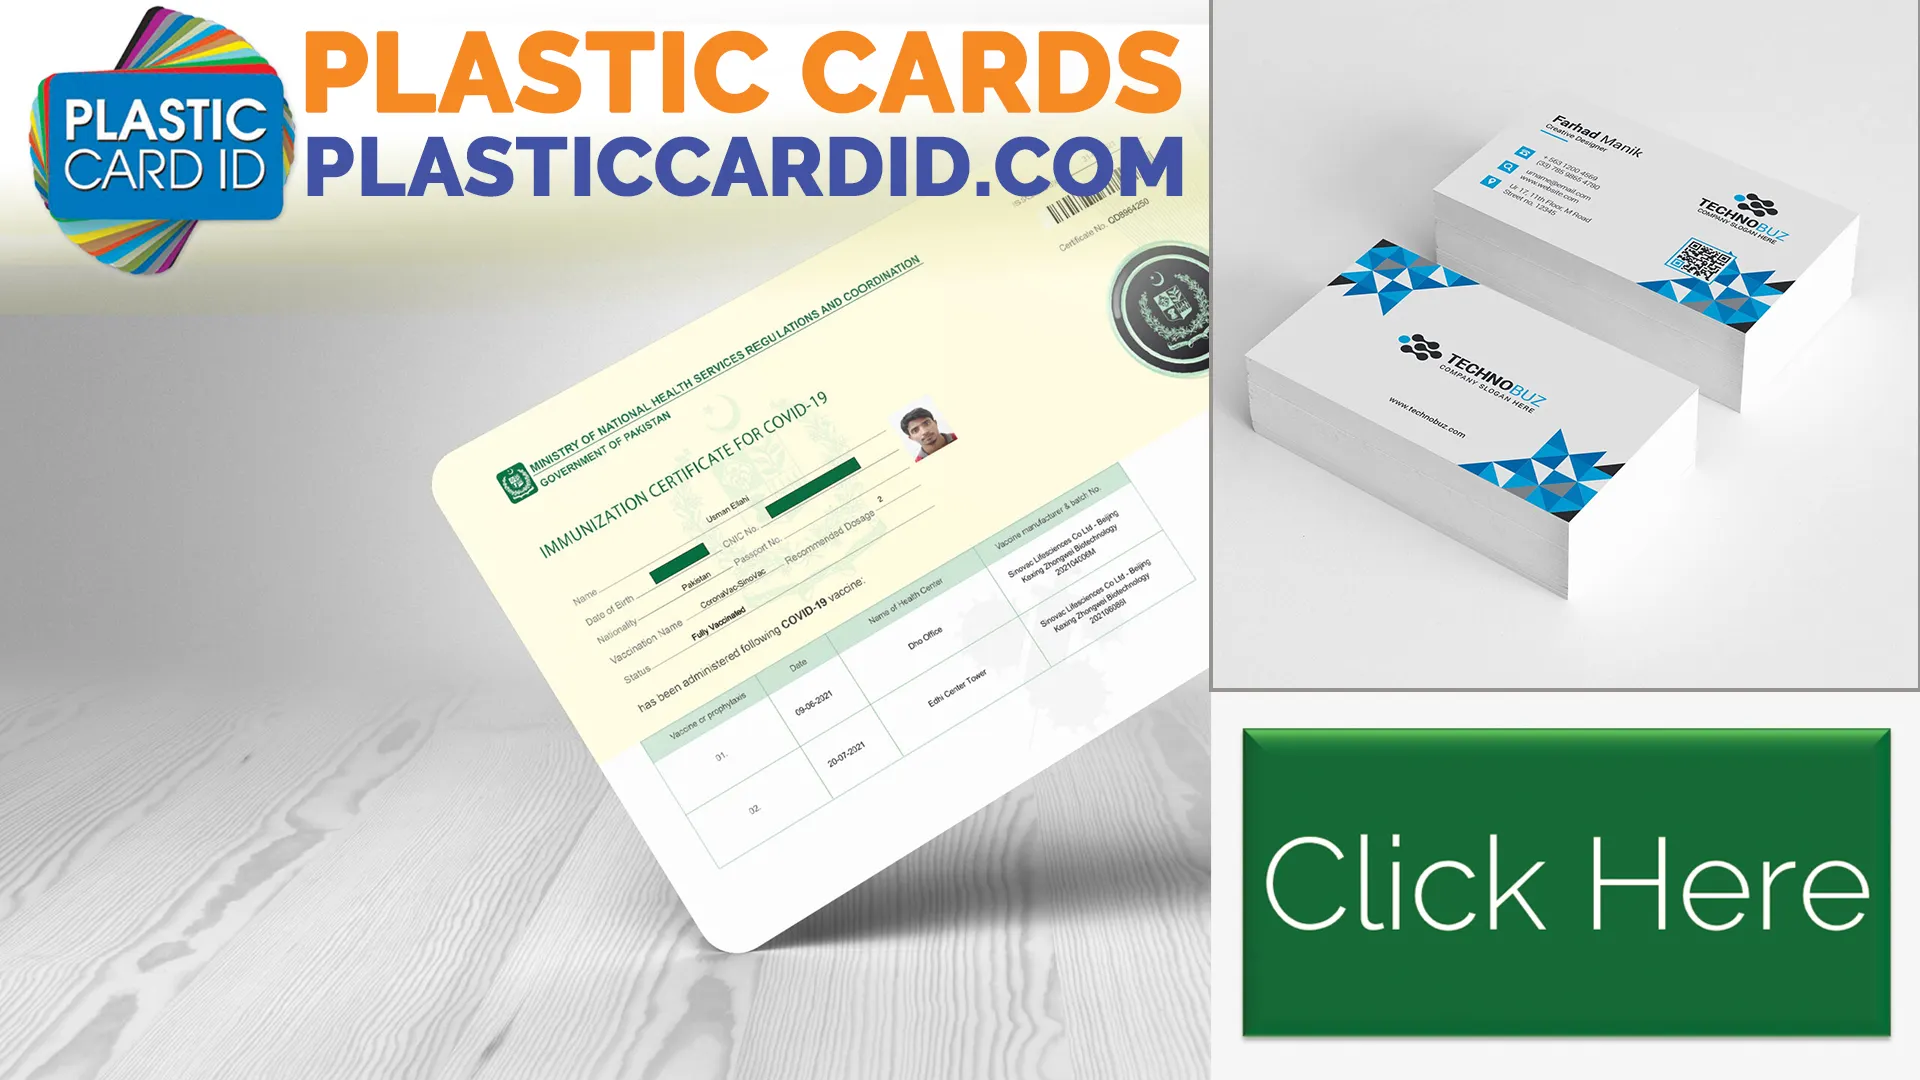 Make Your Brand Pop with the Perfect Plastic Card